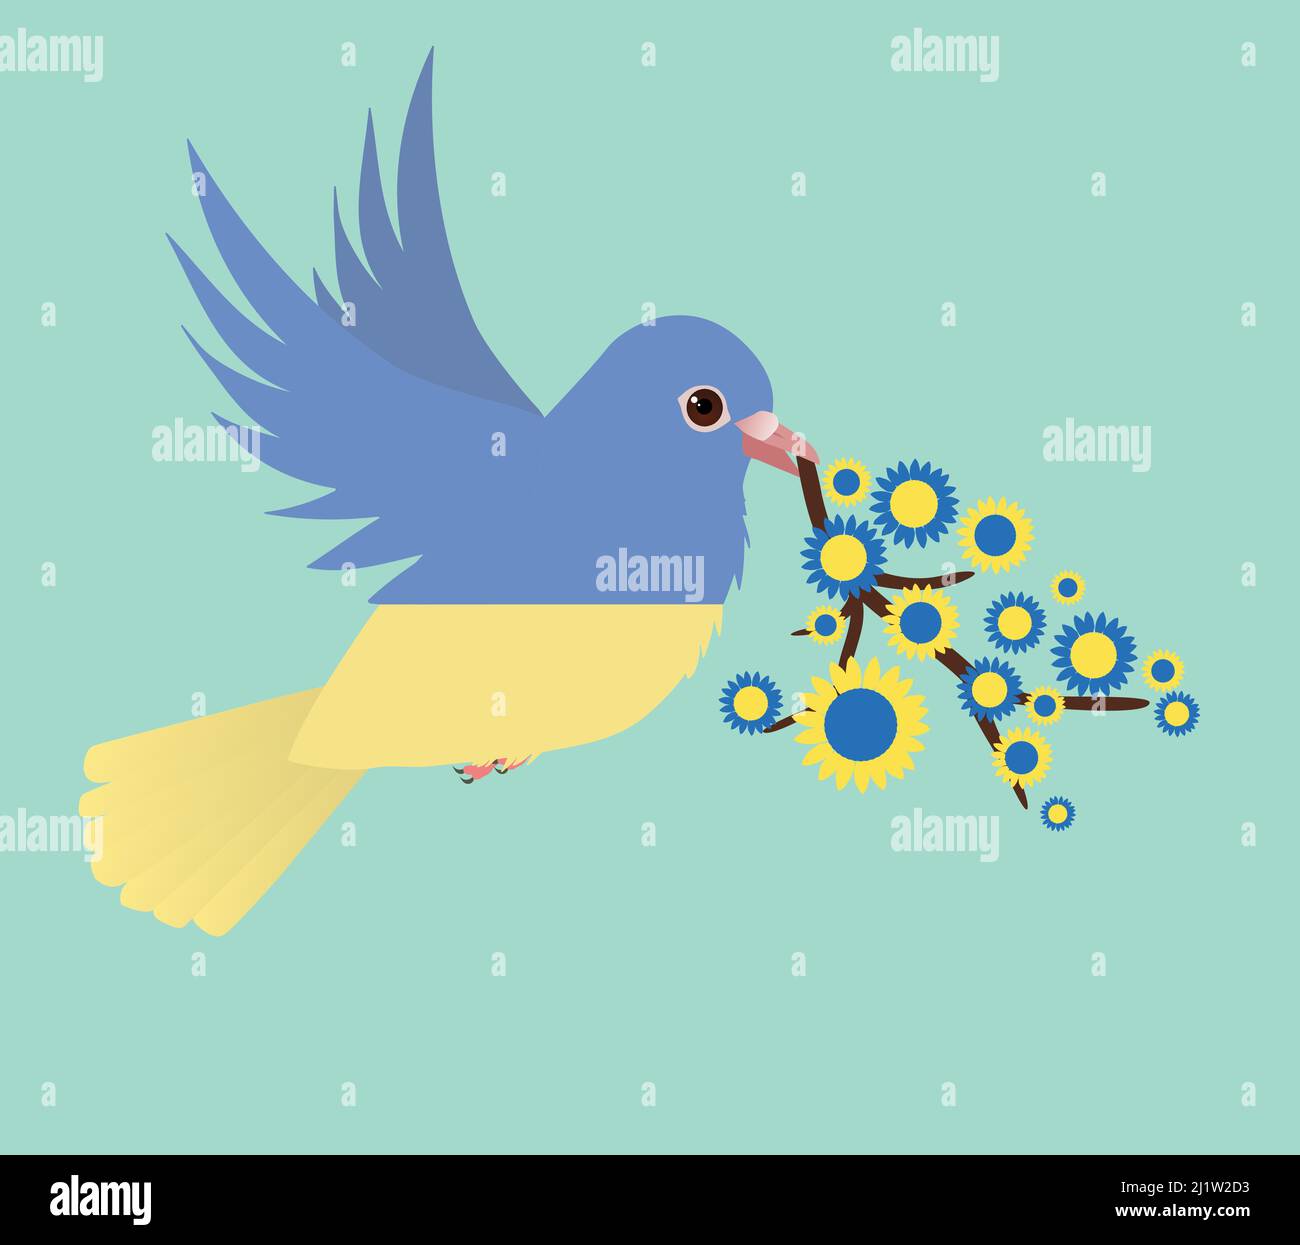 A dove of peace in the Ukraine flag colors. The bird is holding a branch with blue and yellow sunflowers The background is a green shade. Stock Vector